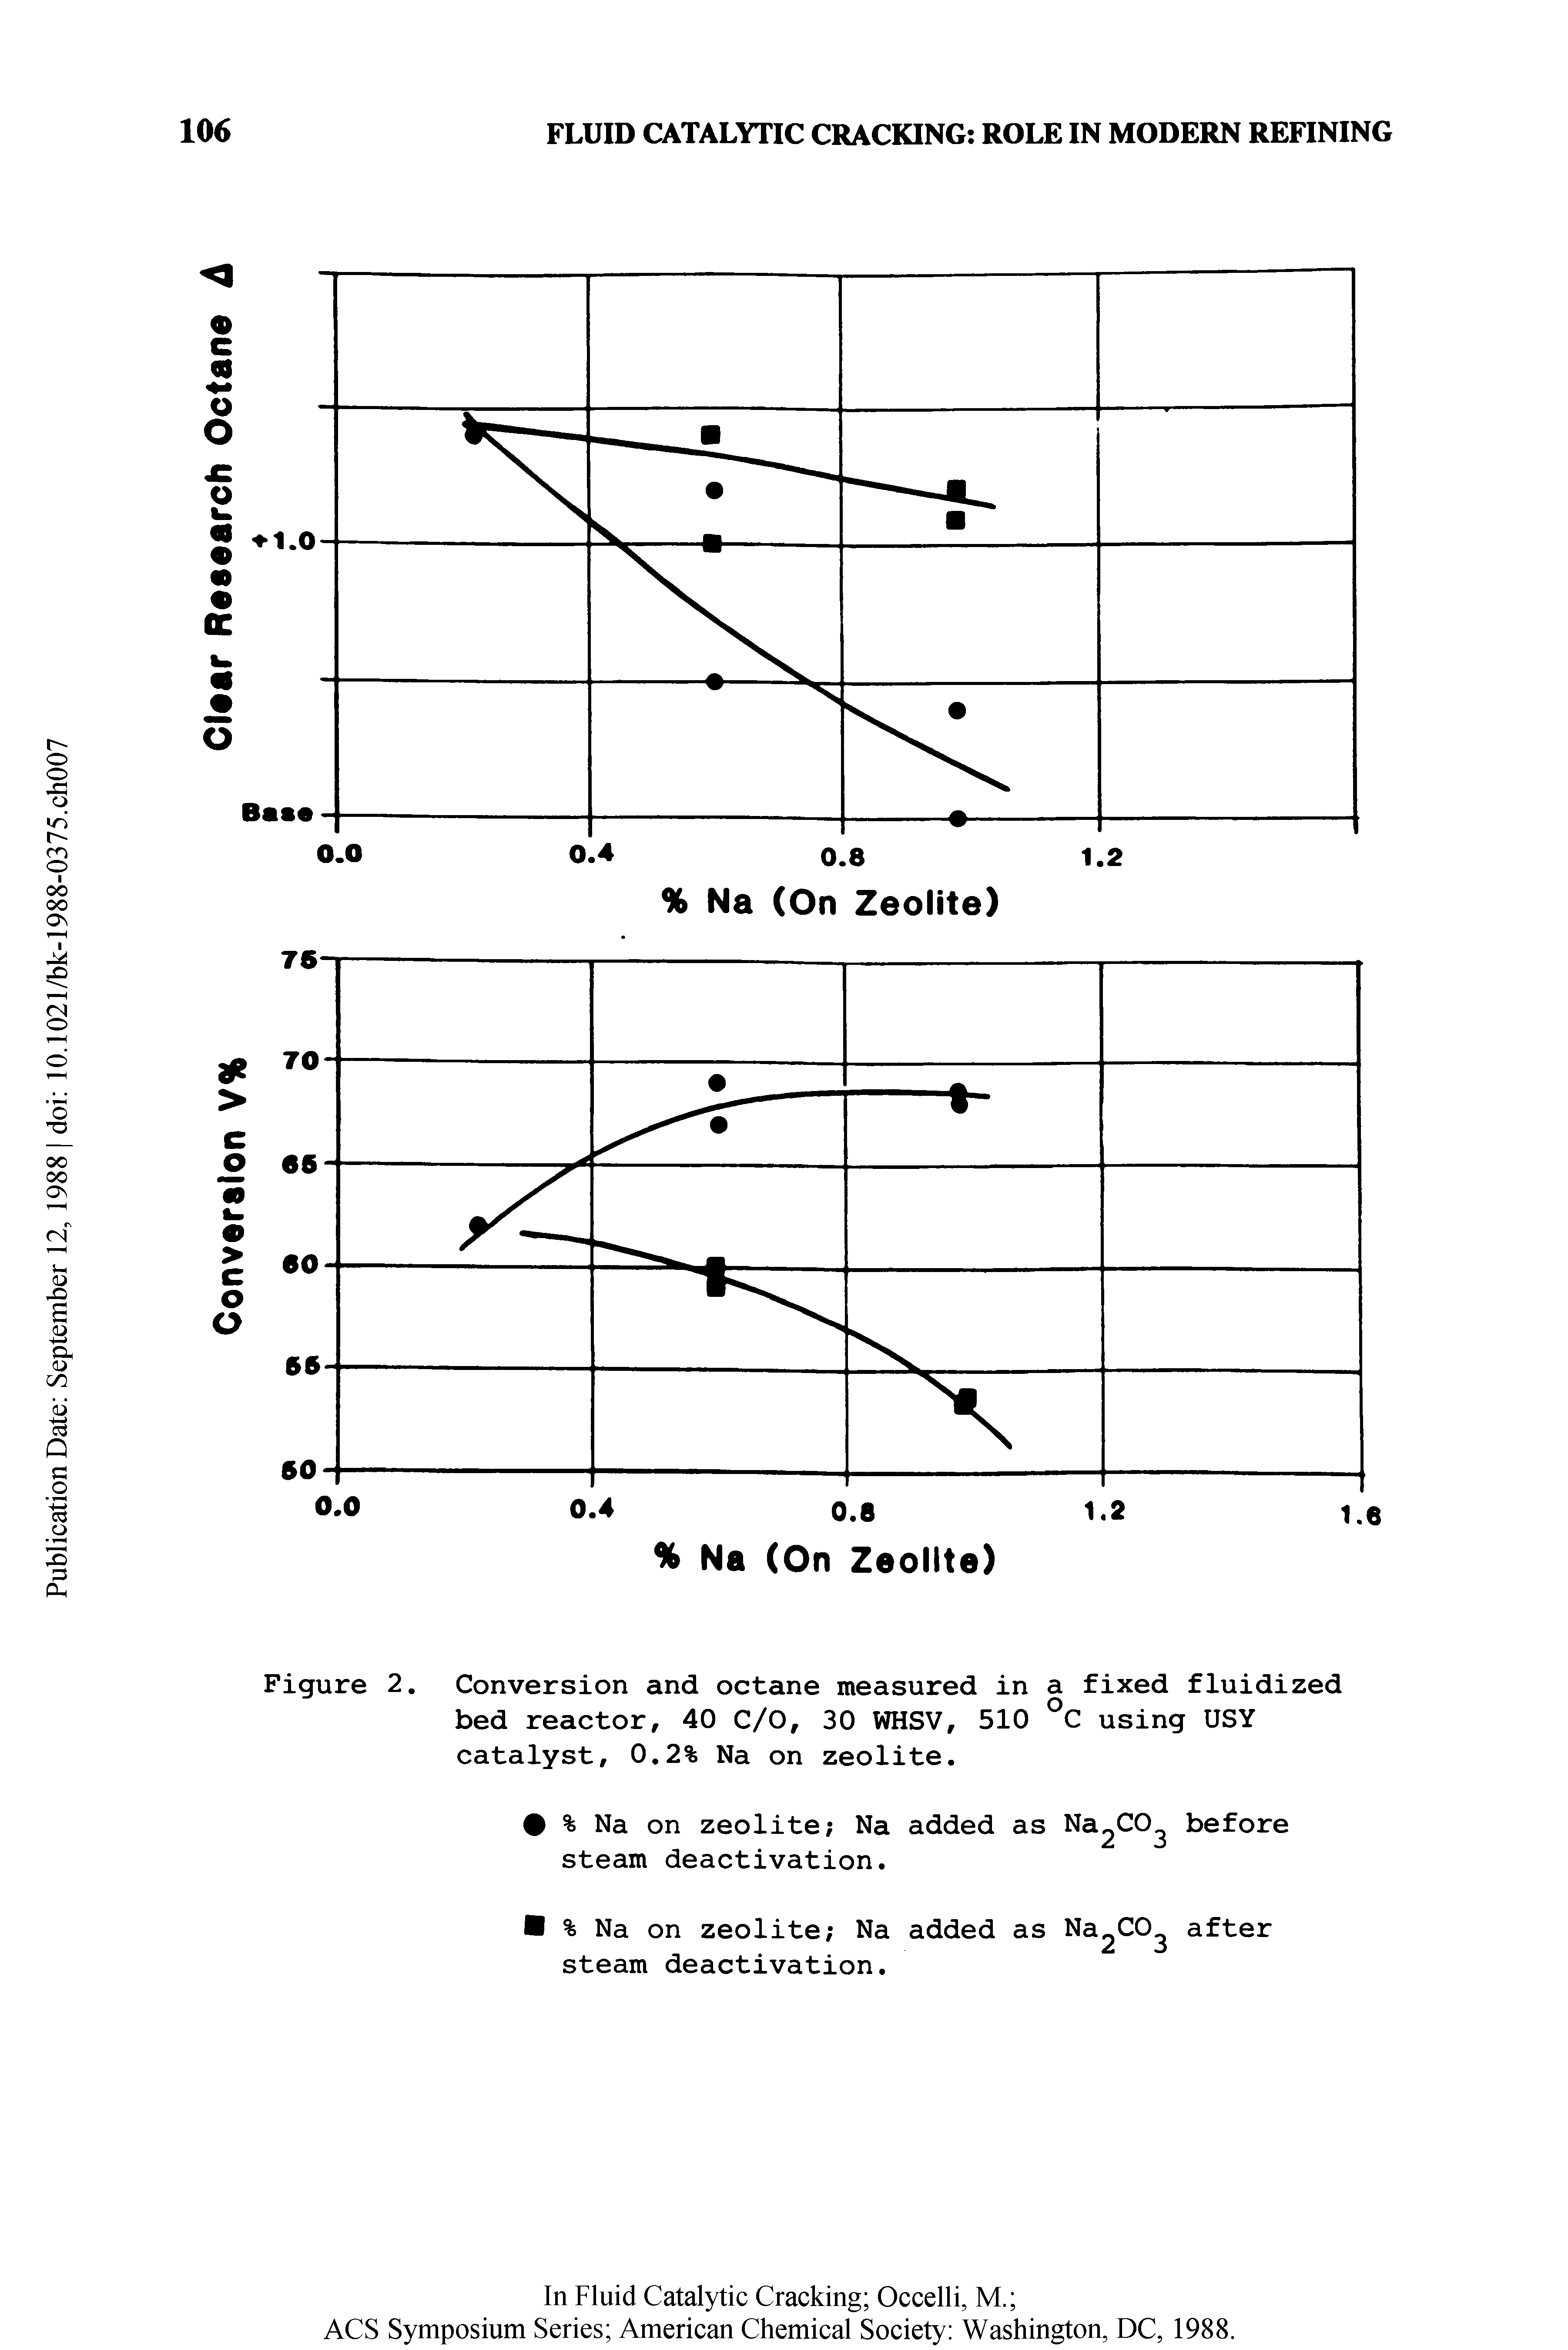 Figure 2. Conversion and octane measured in a fixed fluidized bed reactor, 40 C/0, 30 WHSV, 510 using USY catalyst, 0.2% Na on zeolite.